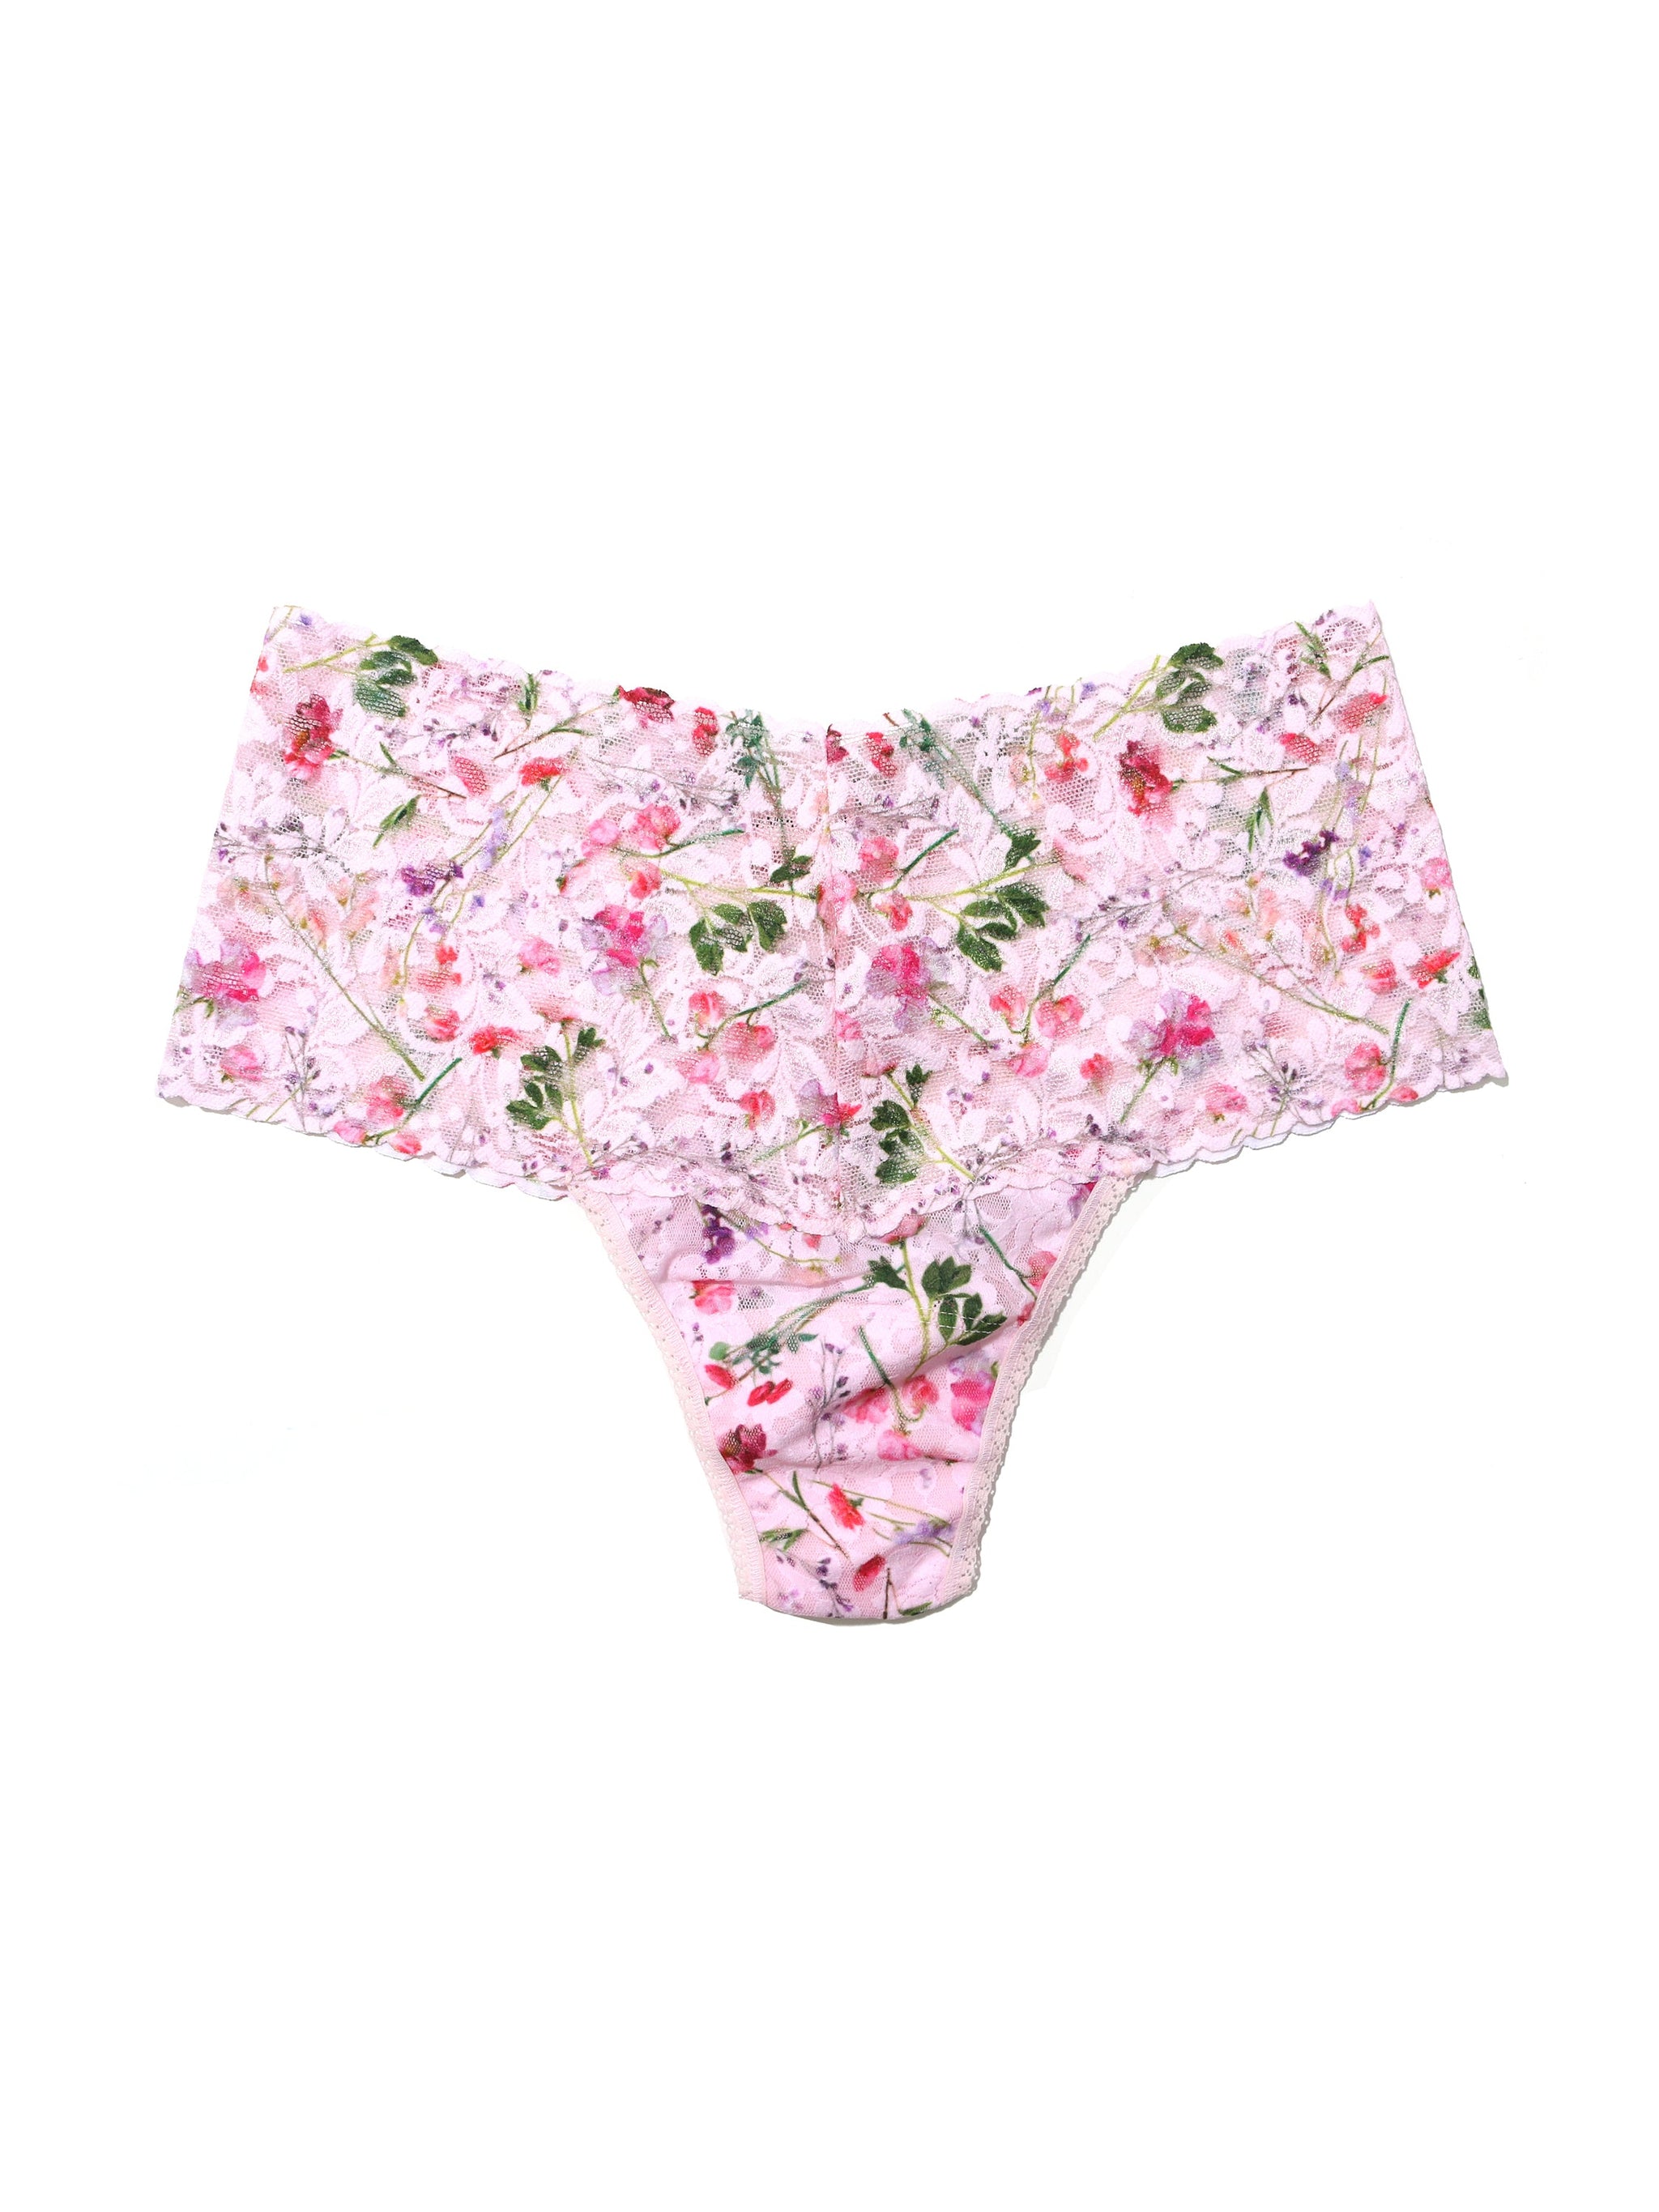 Plus Size Printed Retro Lace Thong Rise And Vines